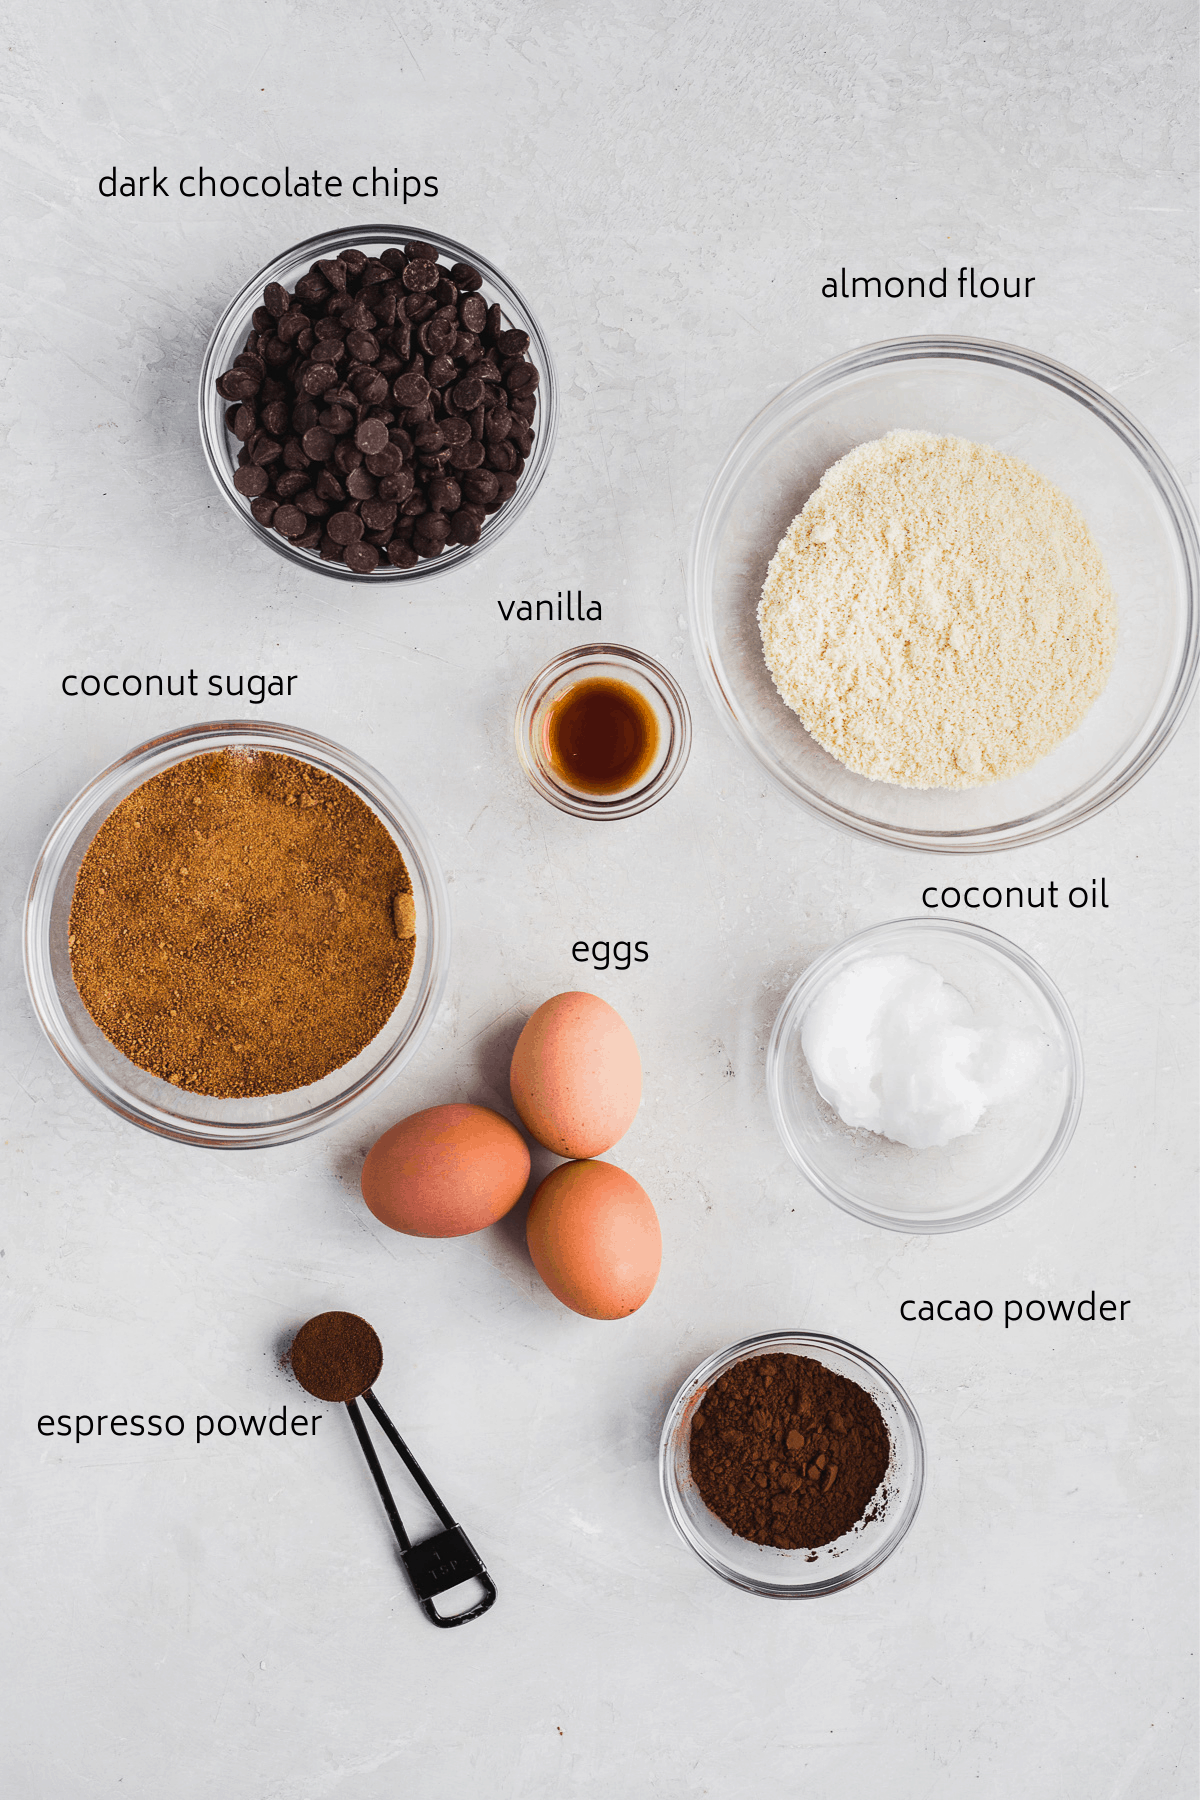 Brownie ingredients on a white surface with labels in black.